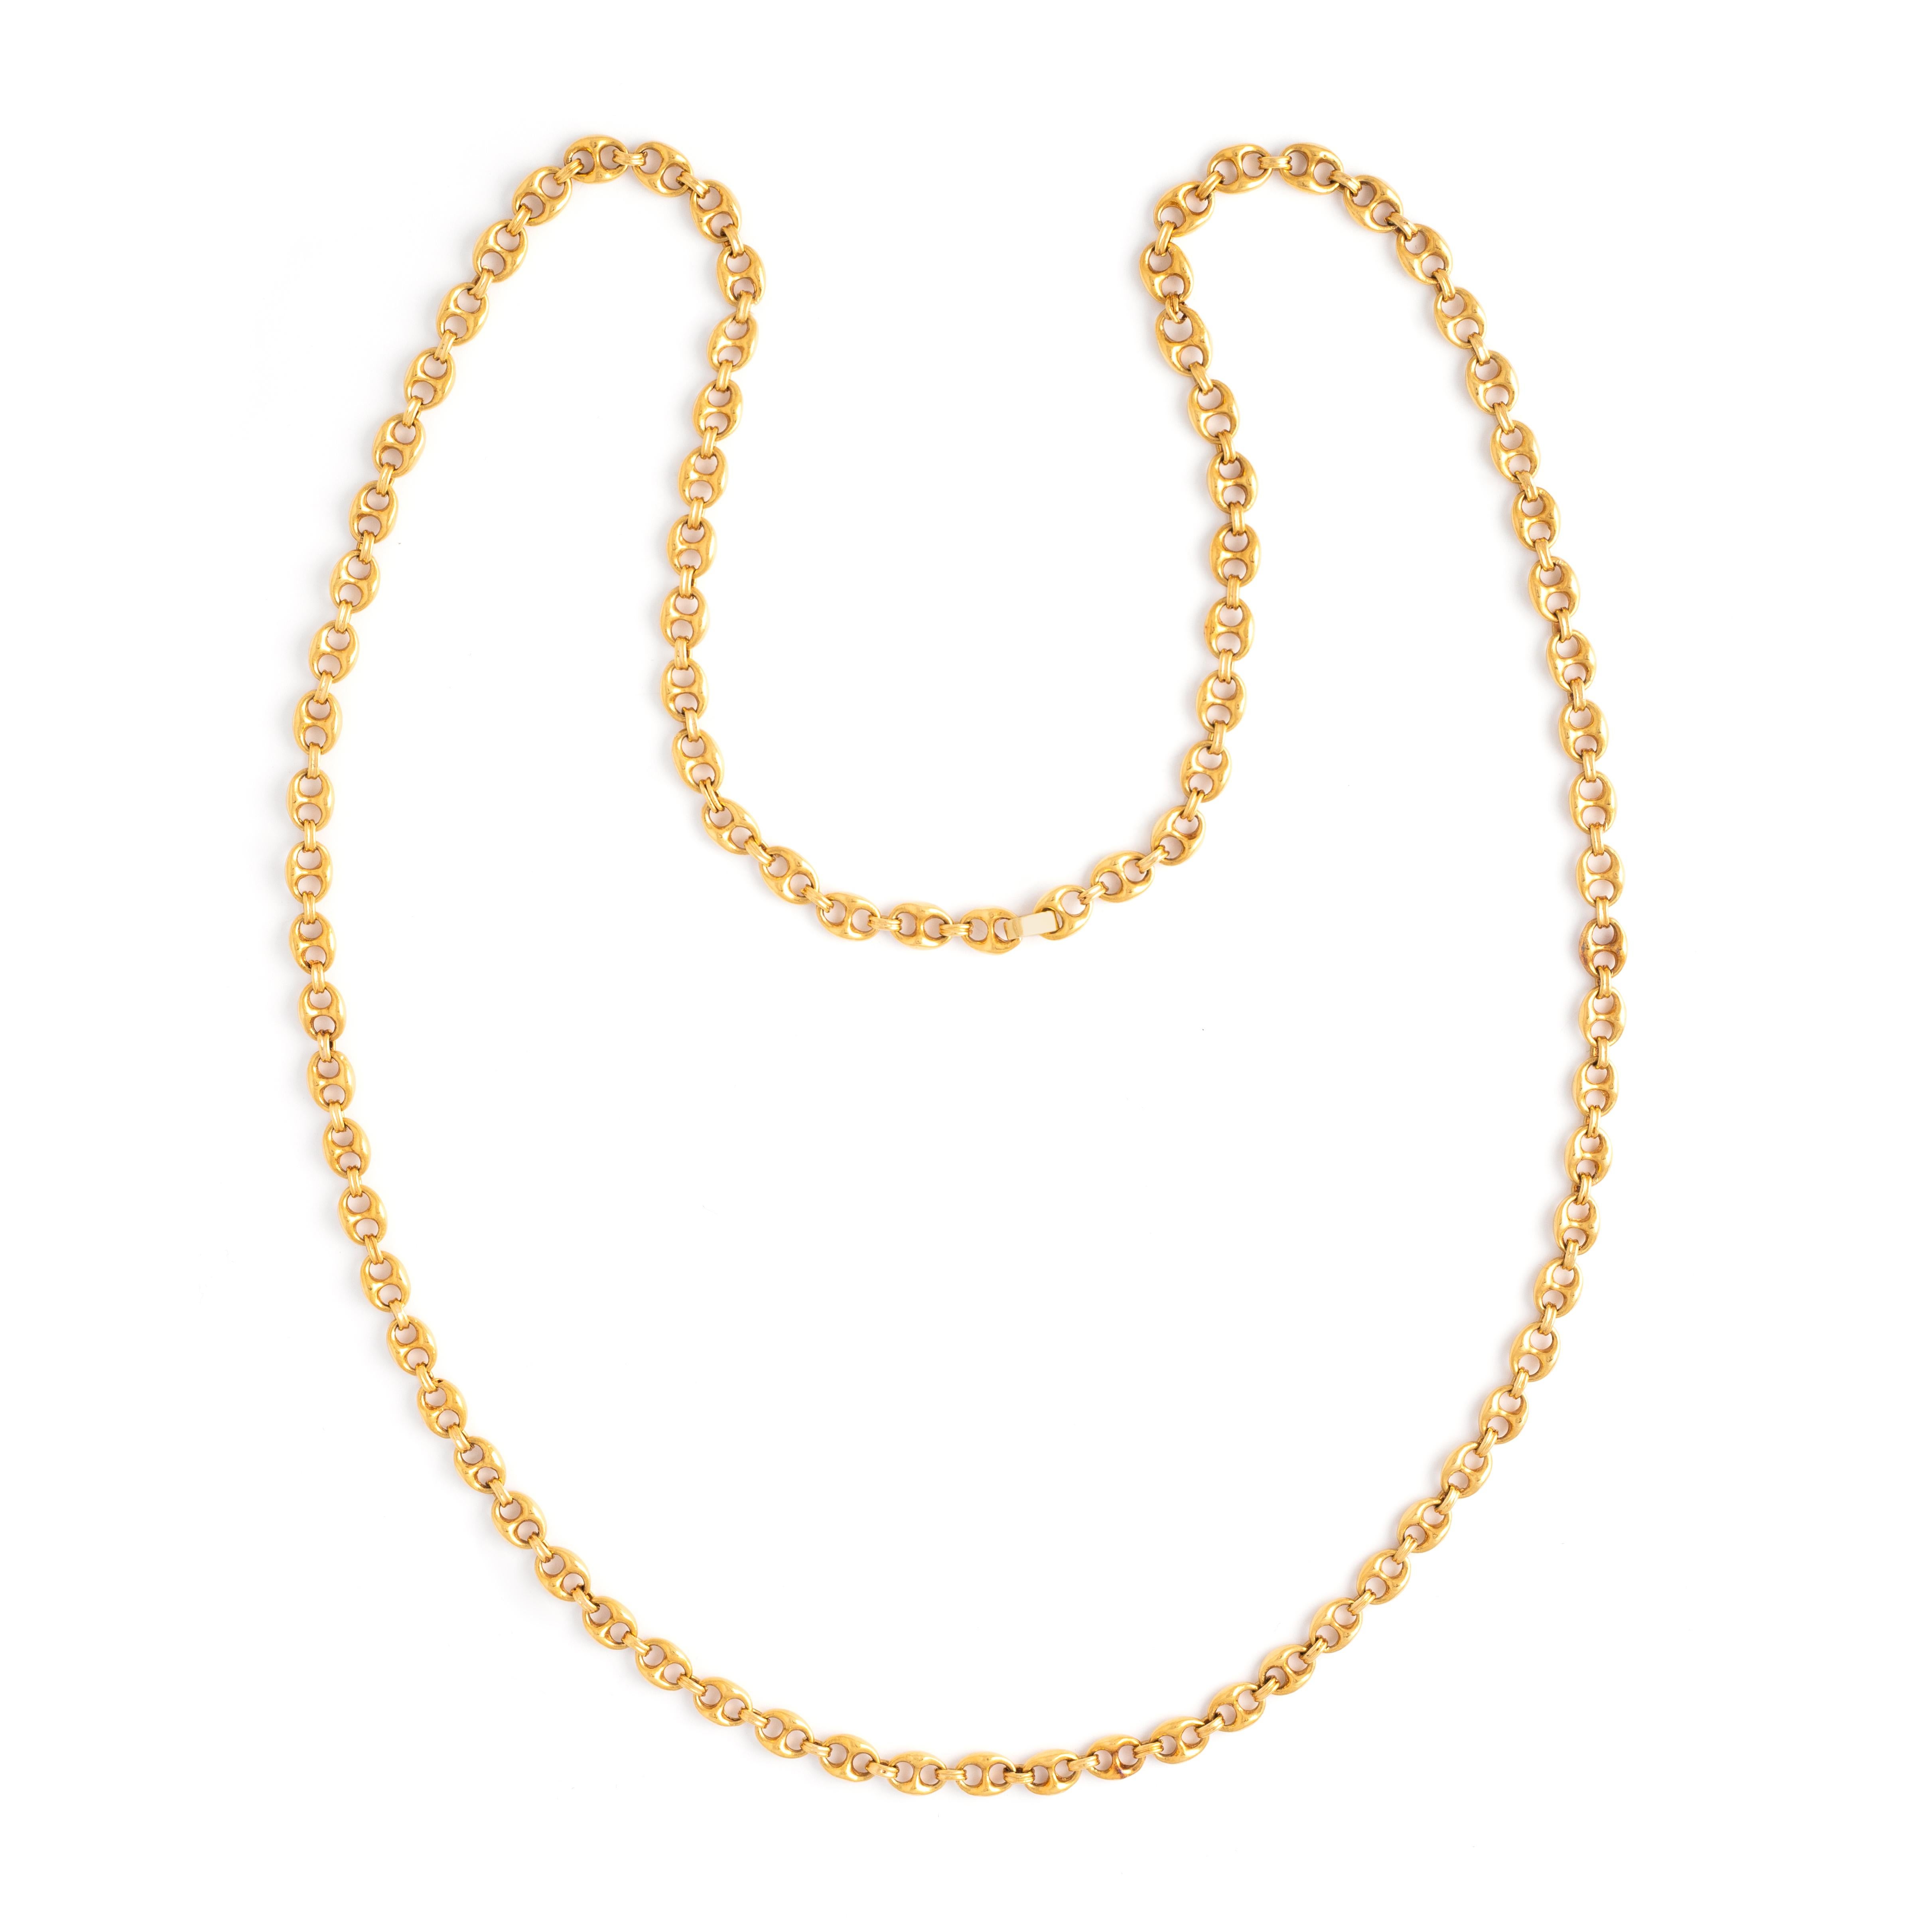 Rare Chain Coffee Bean Yellow Gold 18K Sautoir Necklace. Crafted in luxurious 18K yellow gold, this exquisite sautoir necklace features a unique chain design reminiscent of delicate coffee beans.

With a total length of approximately 90 centimeters